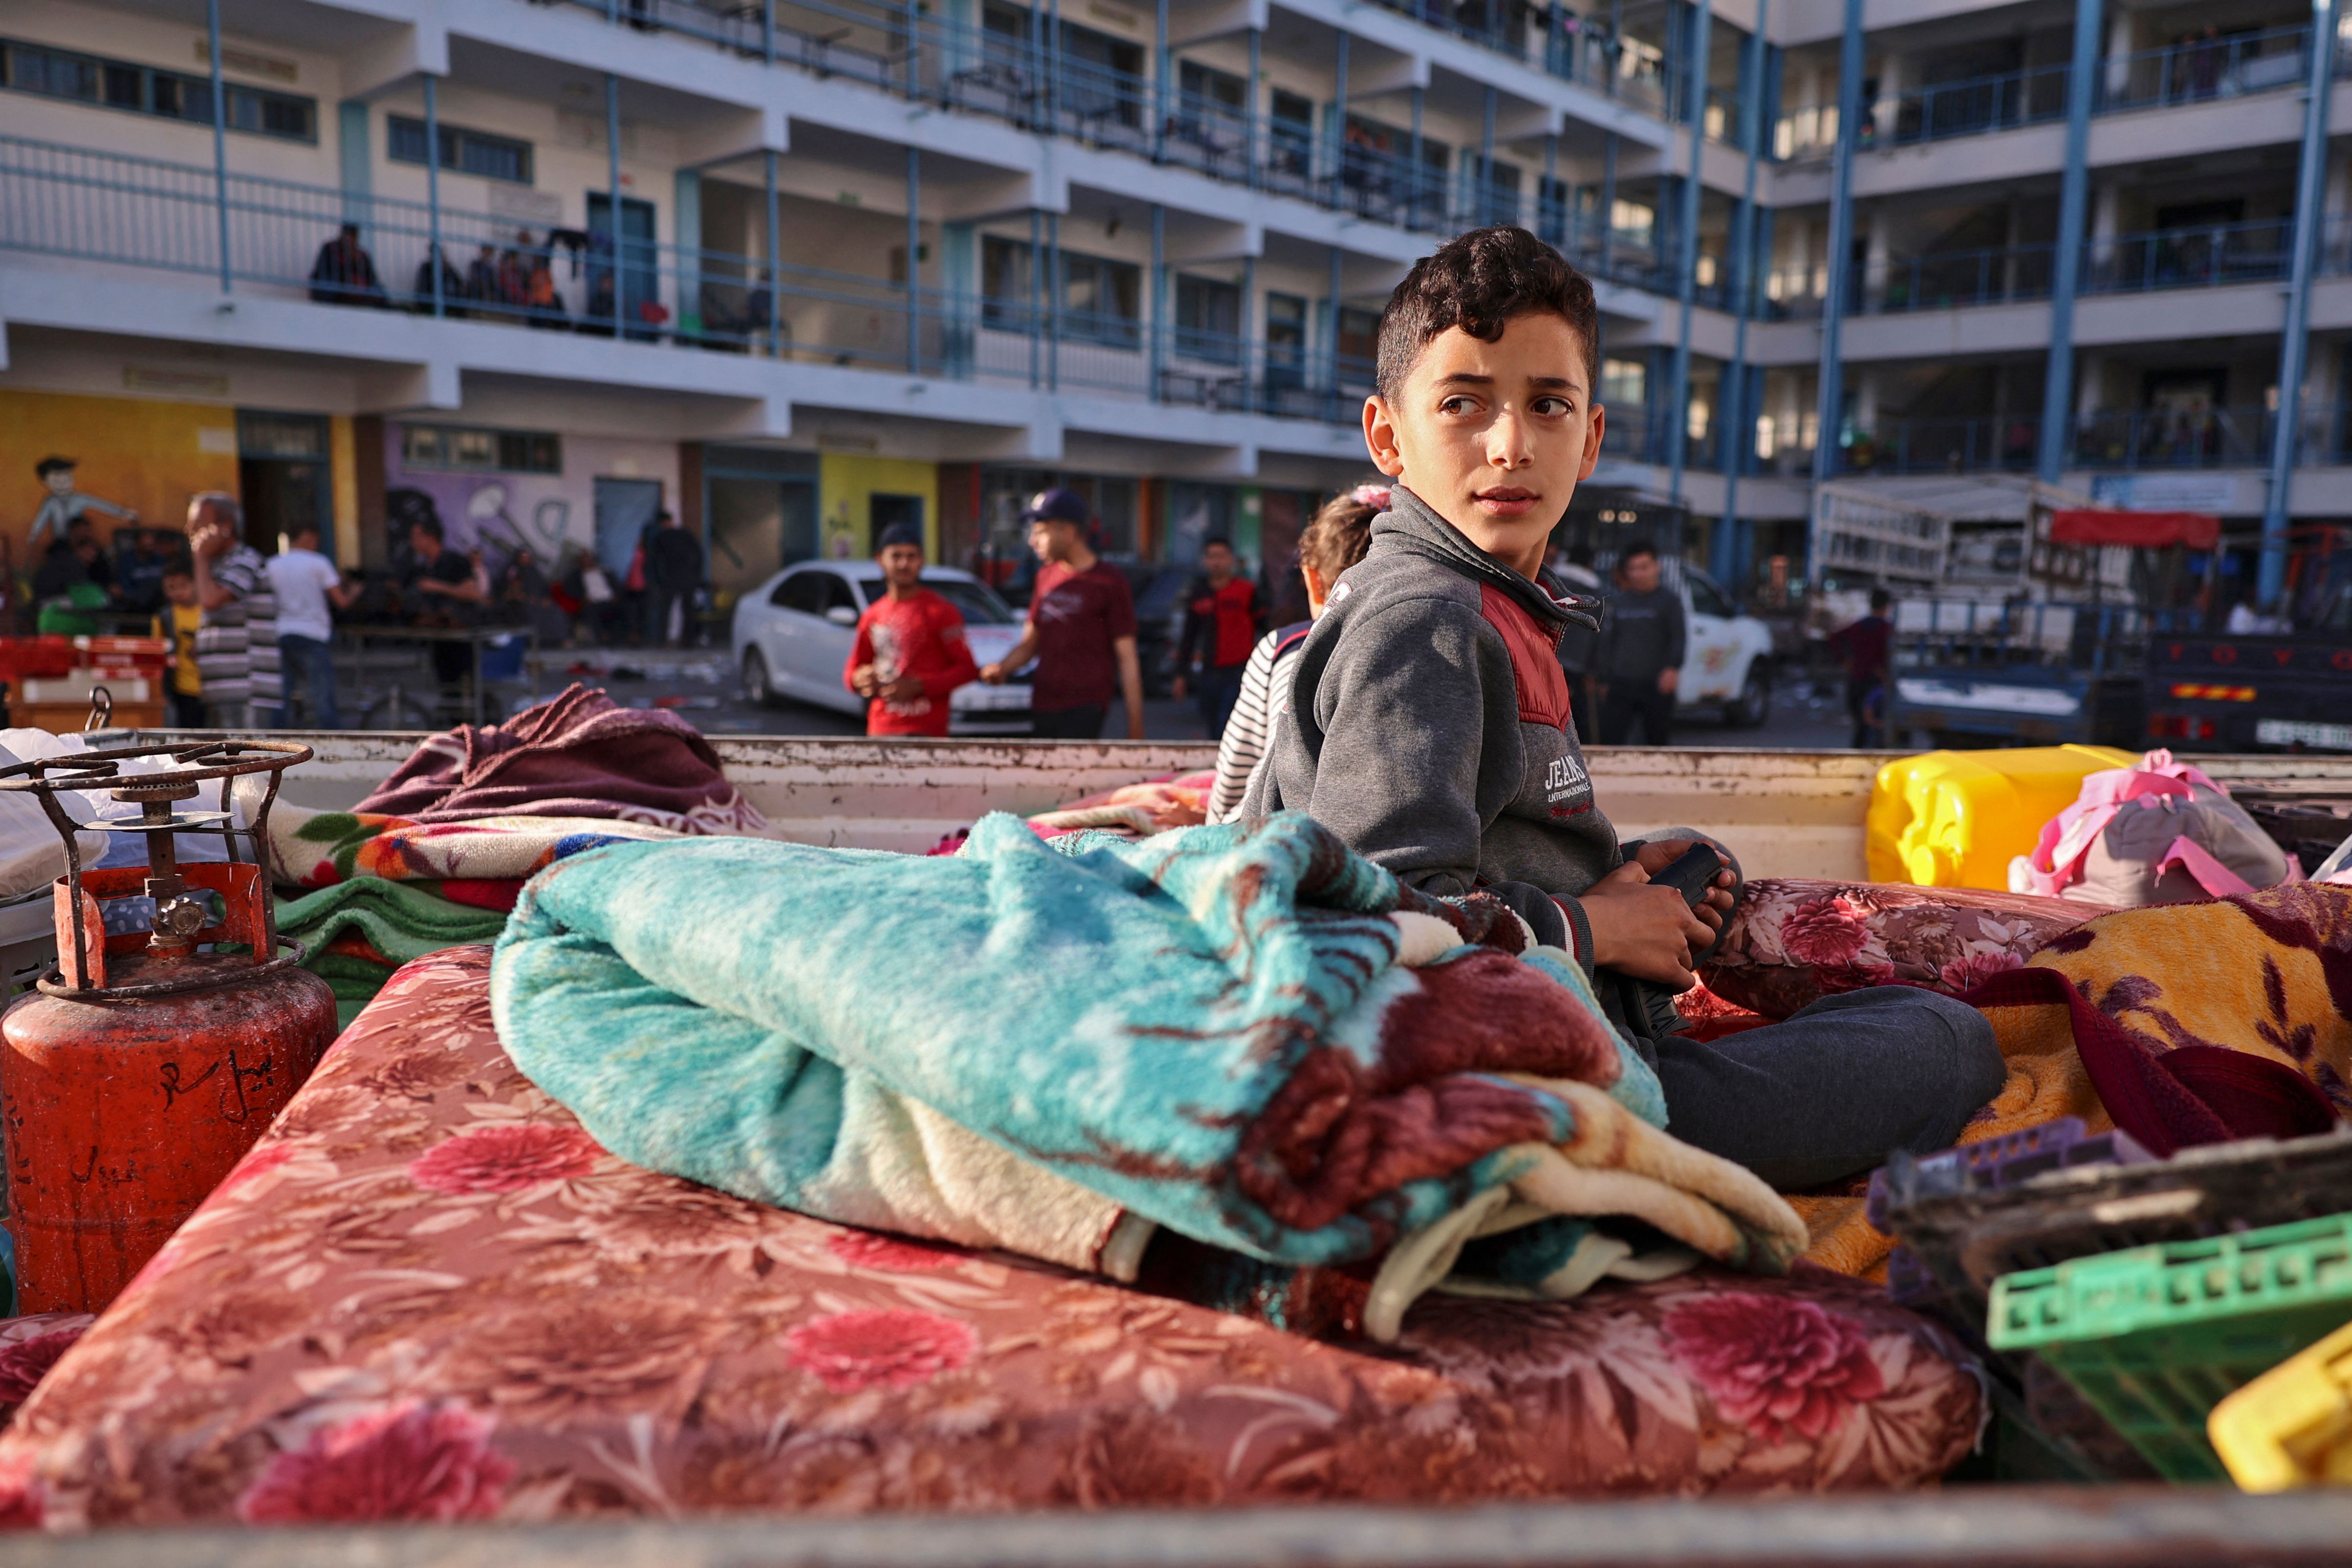 A Palestinian boy who fled his home due to Israeli air and artillery strikes sits on a mattress outside at a school hosting refugees in Gaza city,